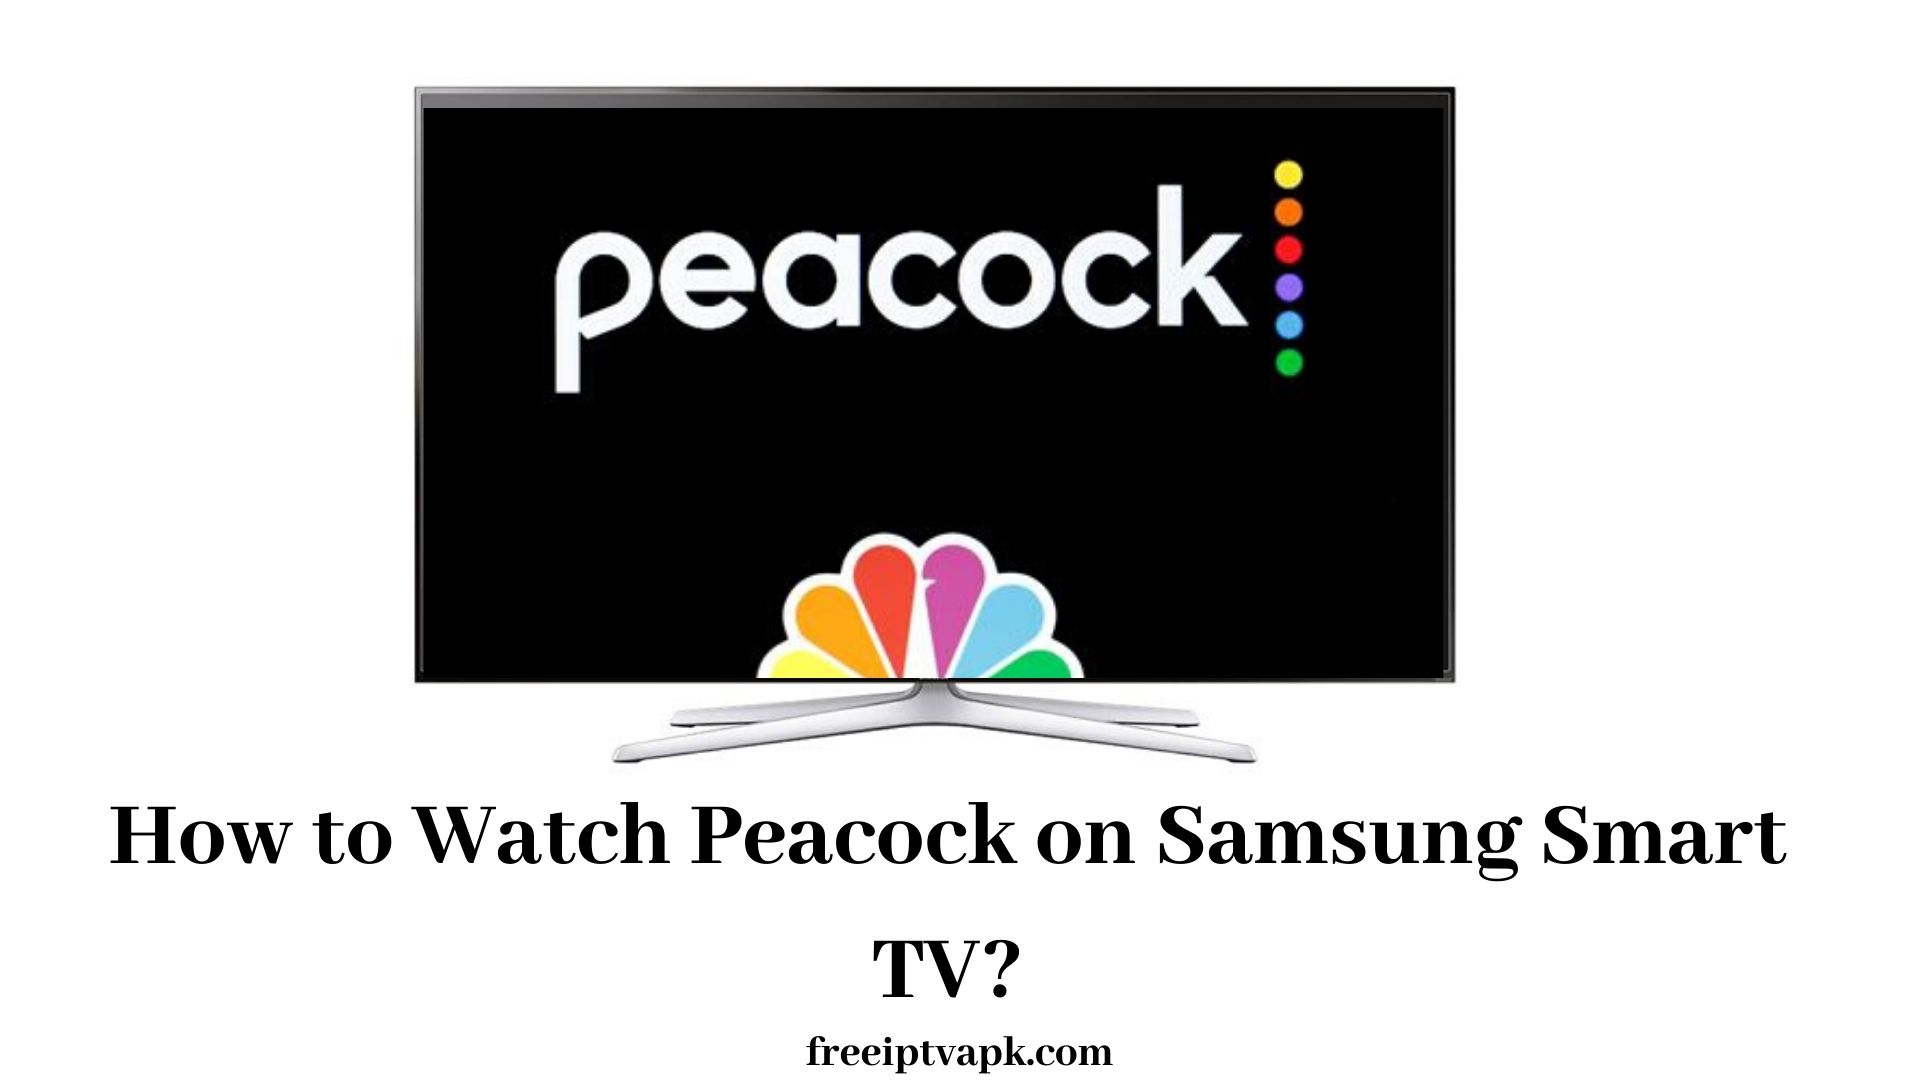 How To Watch Peacock On Samsung Smart TV